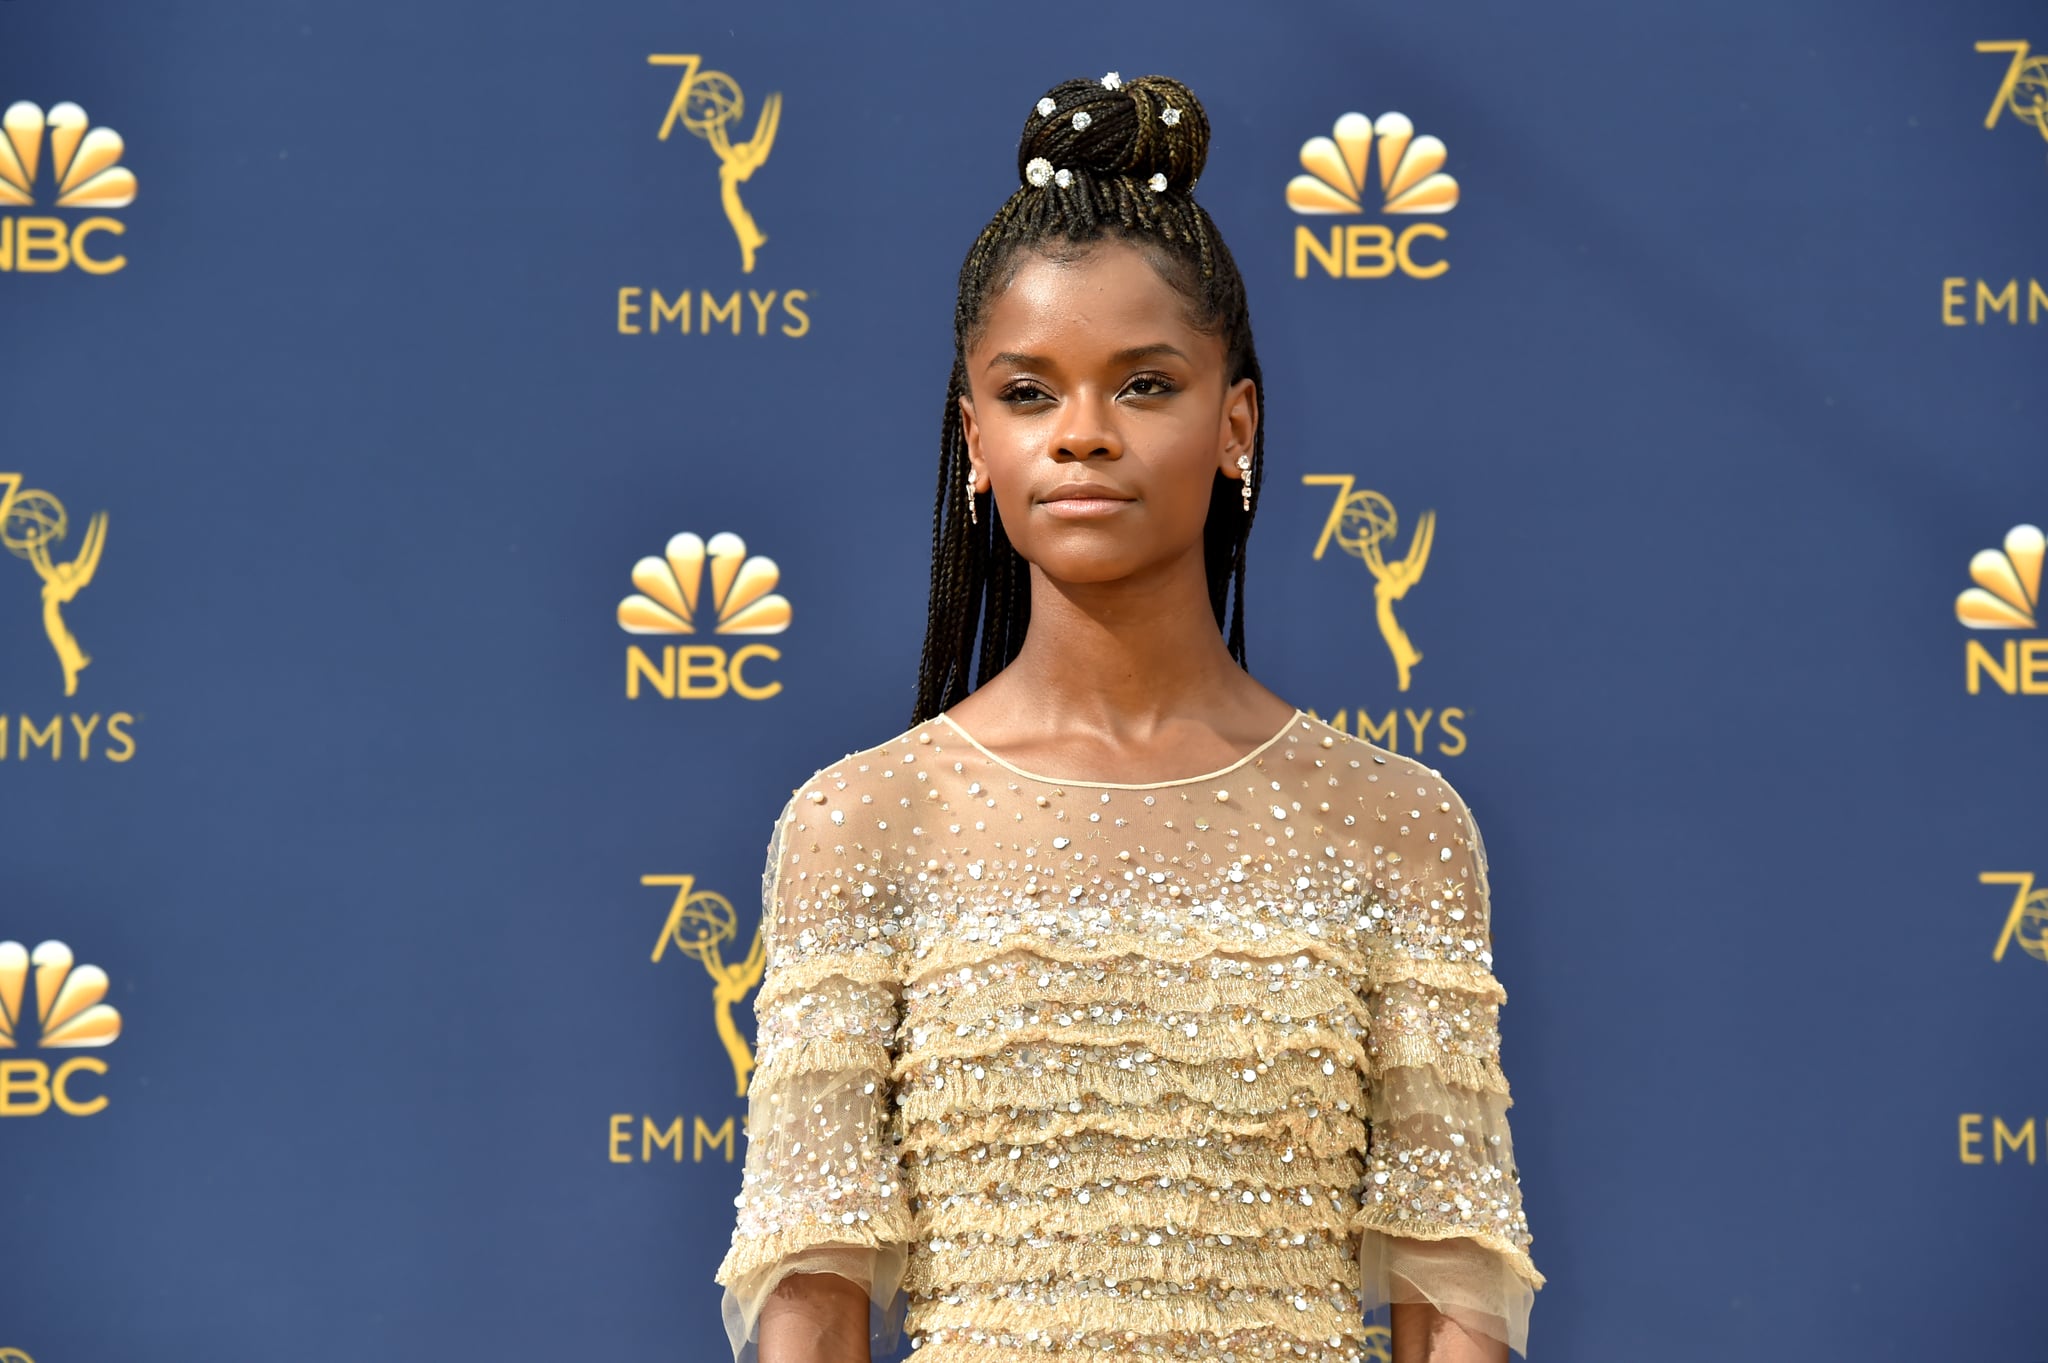 LOS ANGELES, CA - SEPTEMBER 17:  Letitia Wright attends the 70th Emmy Awards at Microsoft Theater on September 17, 2018 in Los Angeles, California.  (Photo by Jeff Kravitz/FilmMagic)